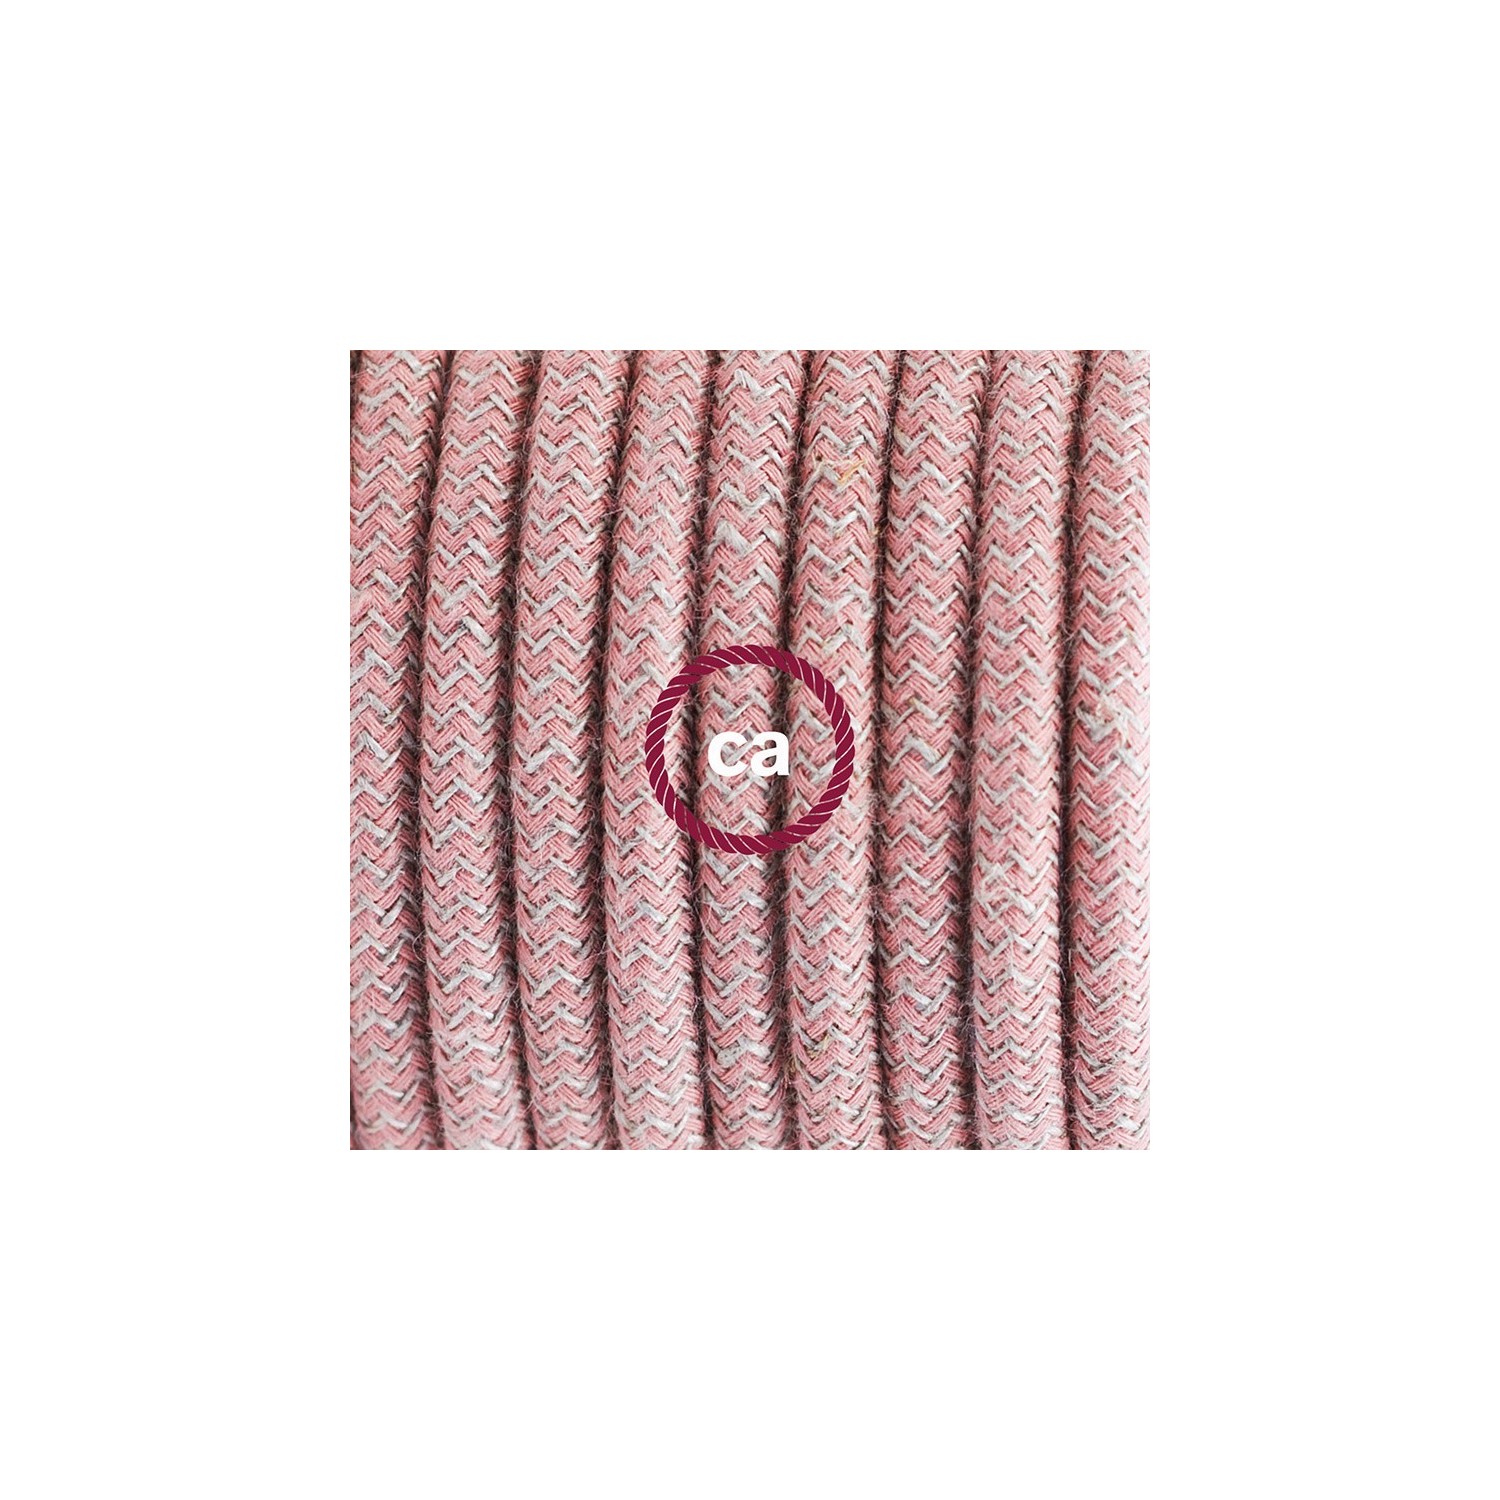 Create your RD71 ZigZag Ancient Pink Snake and bring the light wherever you want.